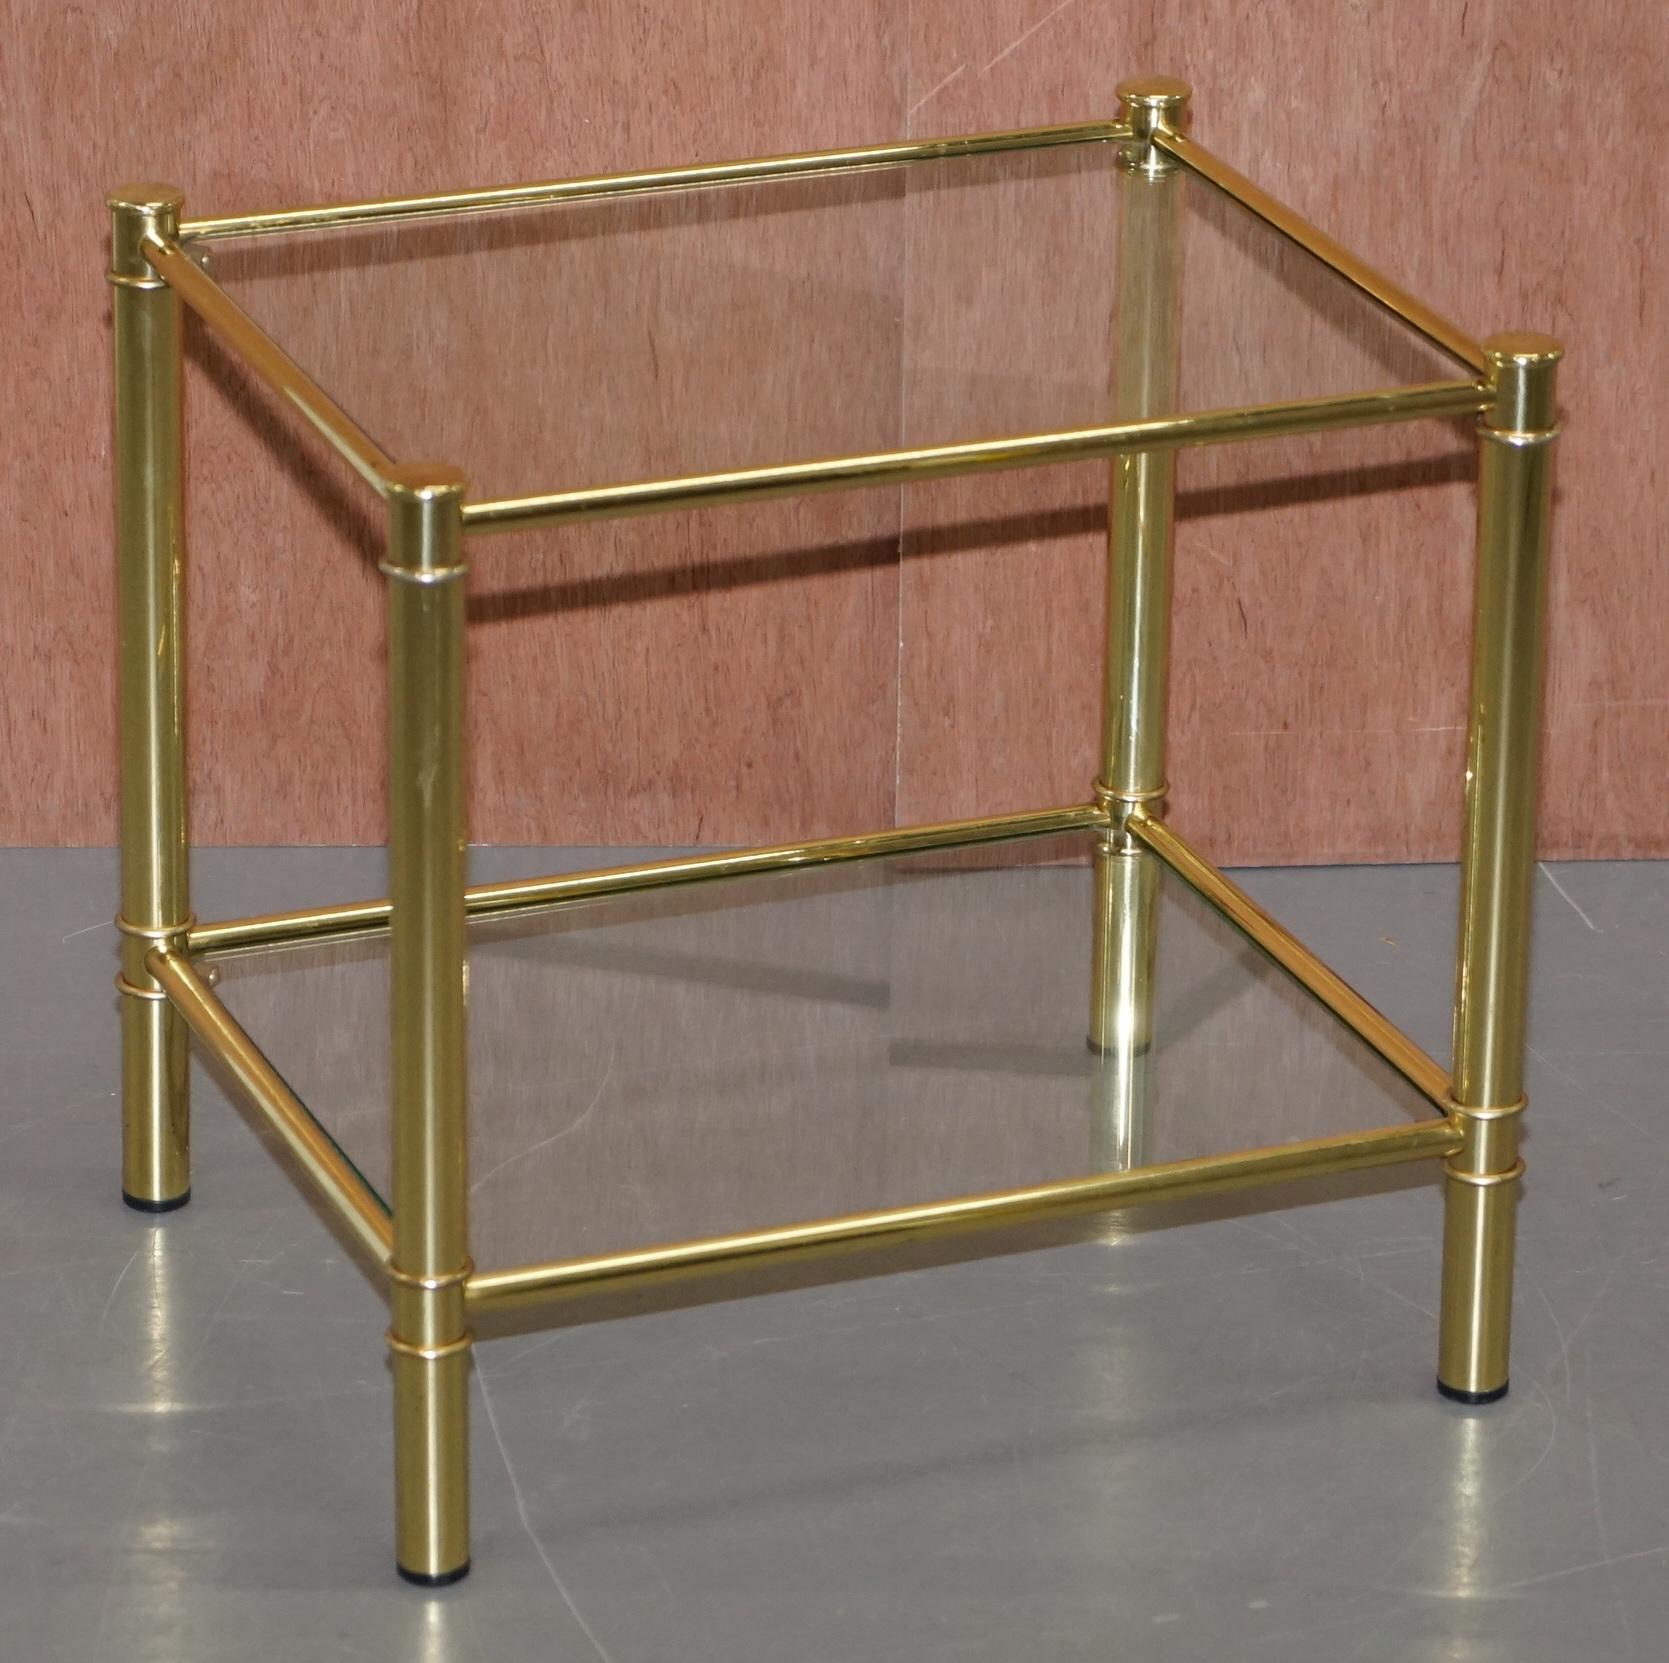 We are delighted to offer for sale this lovely suite of three gilt brass side tables with glass shelves

A good looking vintage suite, they were being used as two side tables and one small coffee table but could easily be used as three side